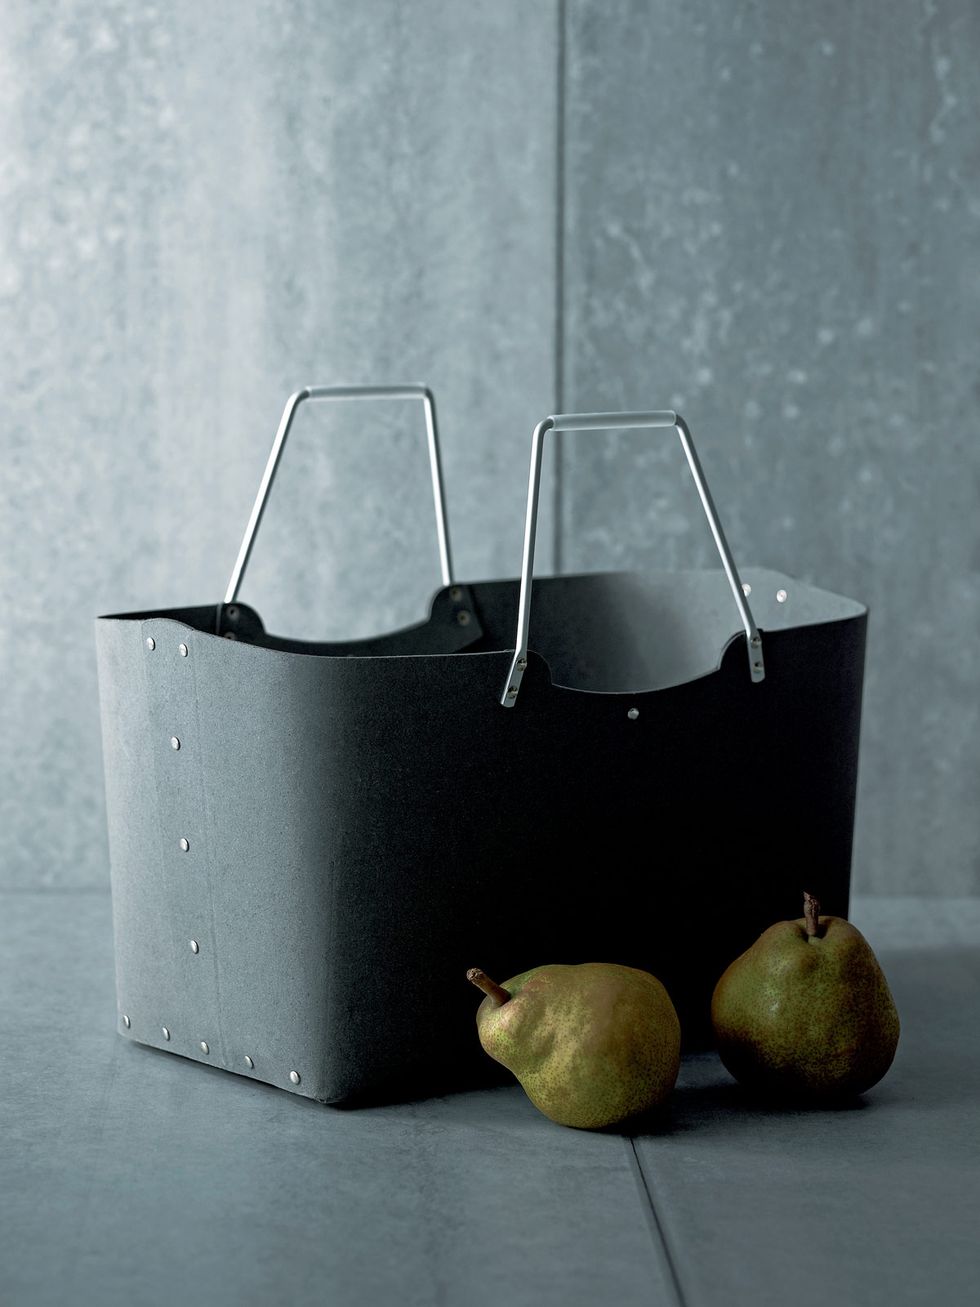 pear, Pear, Fruit, Produce, Still life photography, Grey, Photography, Natural foods, Home accessories, Storage basket, 